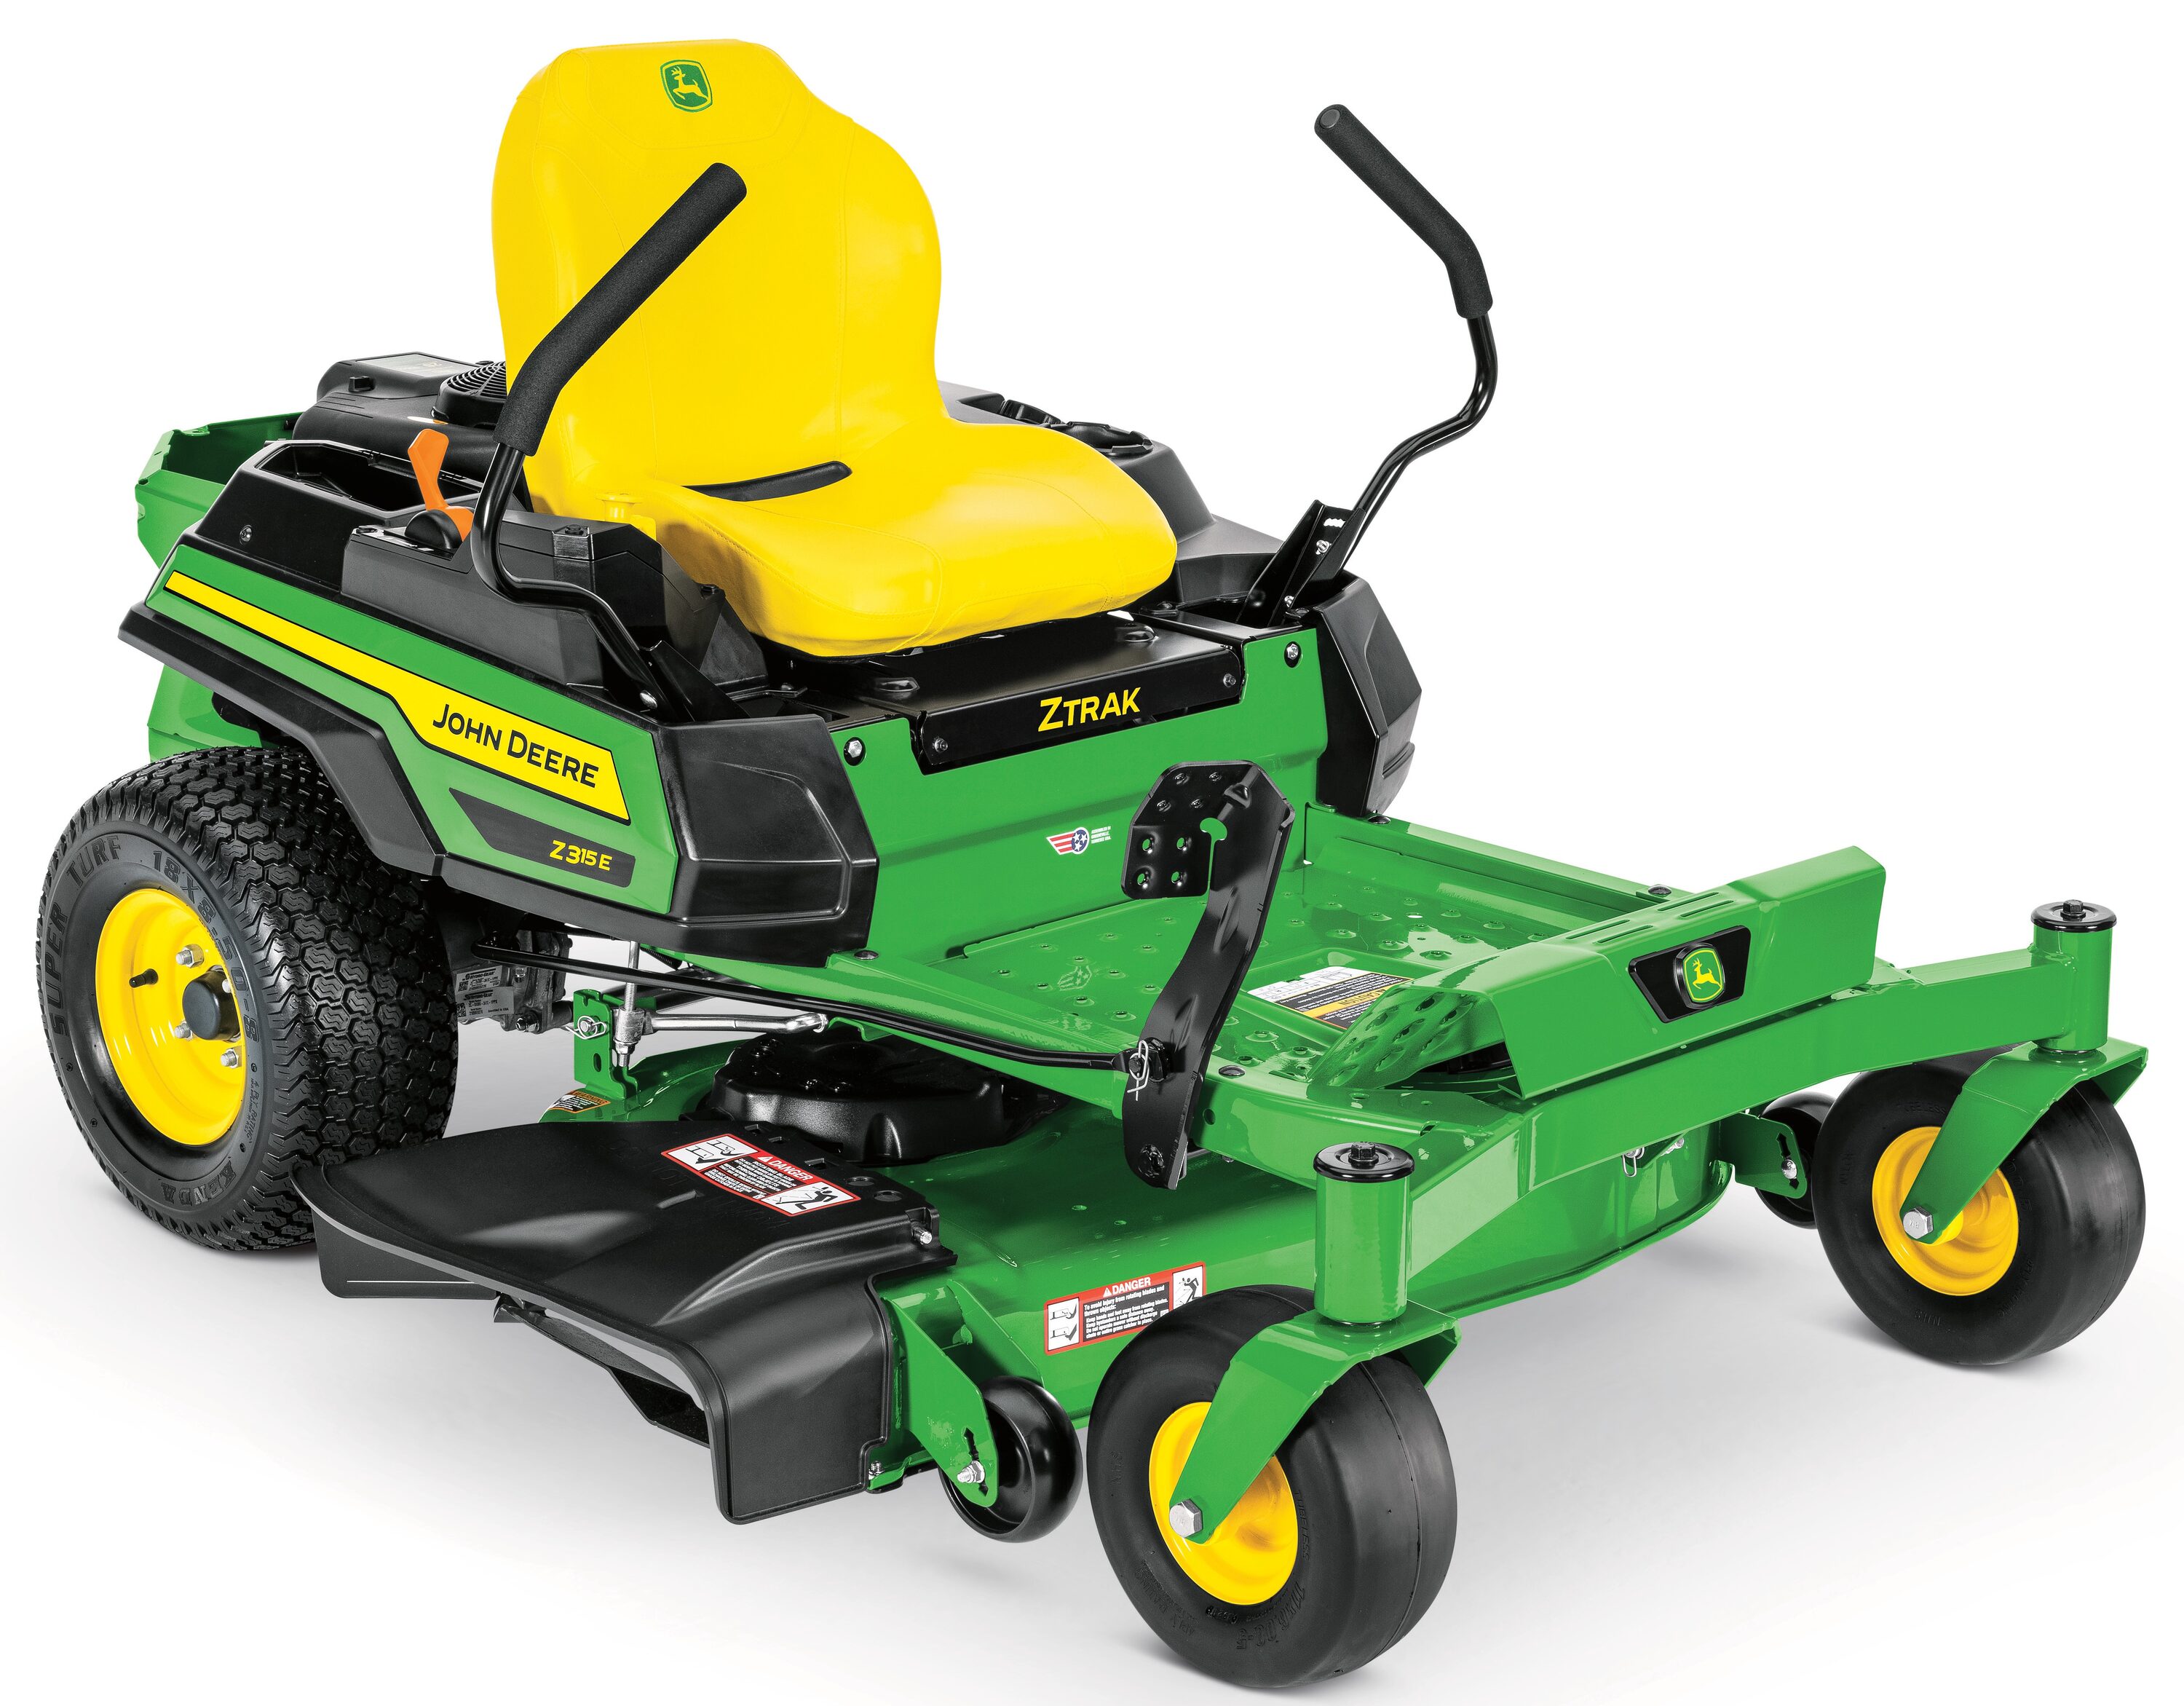 Earthwise Lawn Mowers at